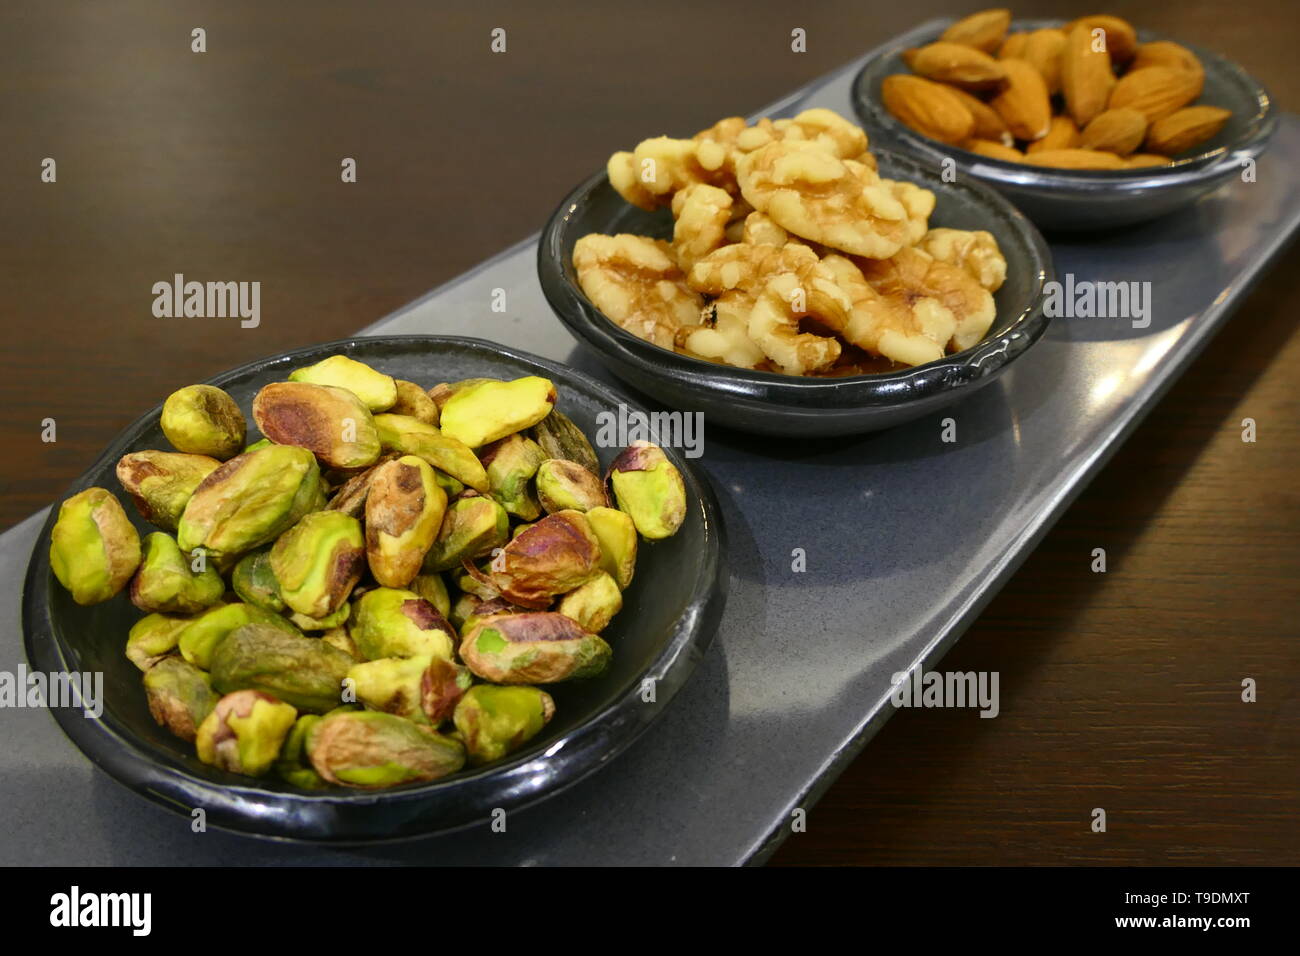 Bowls with three different nut varieties, including: walnuts, pistachios and almonds Stock Photo